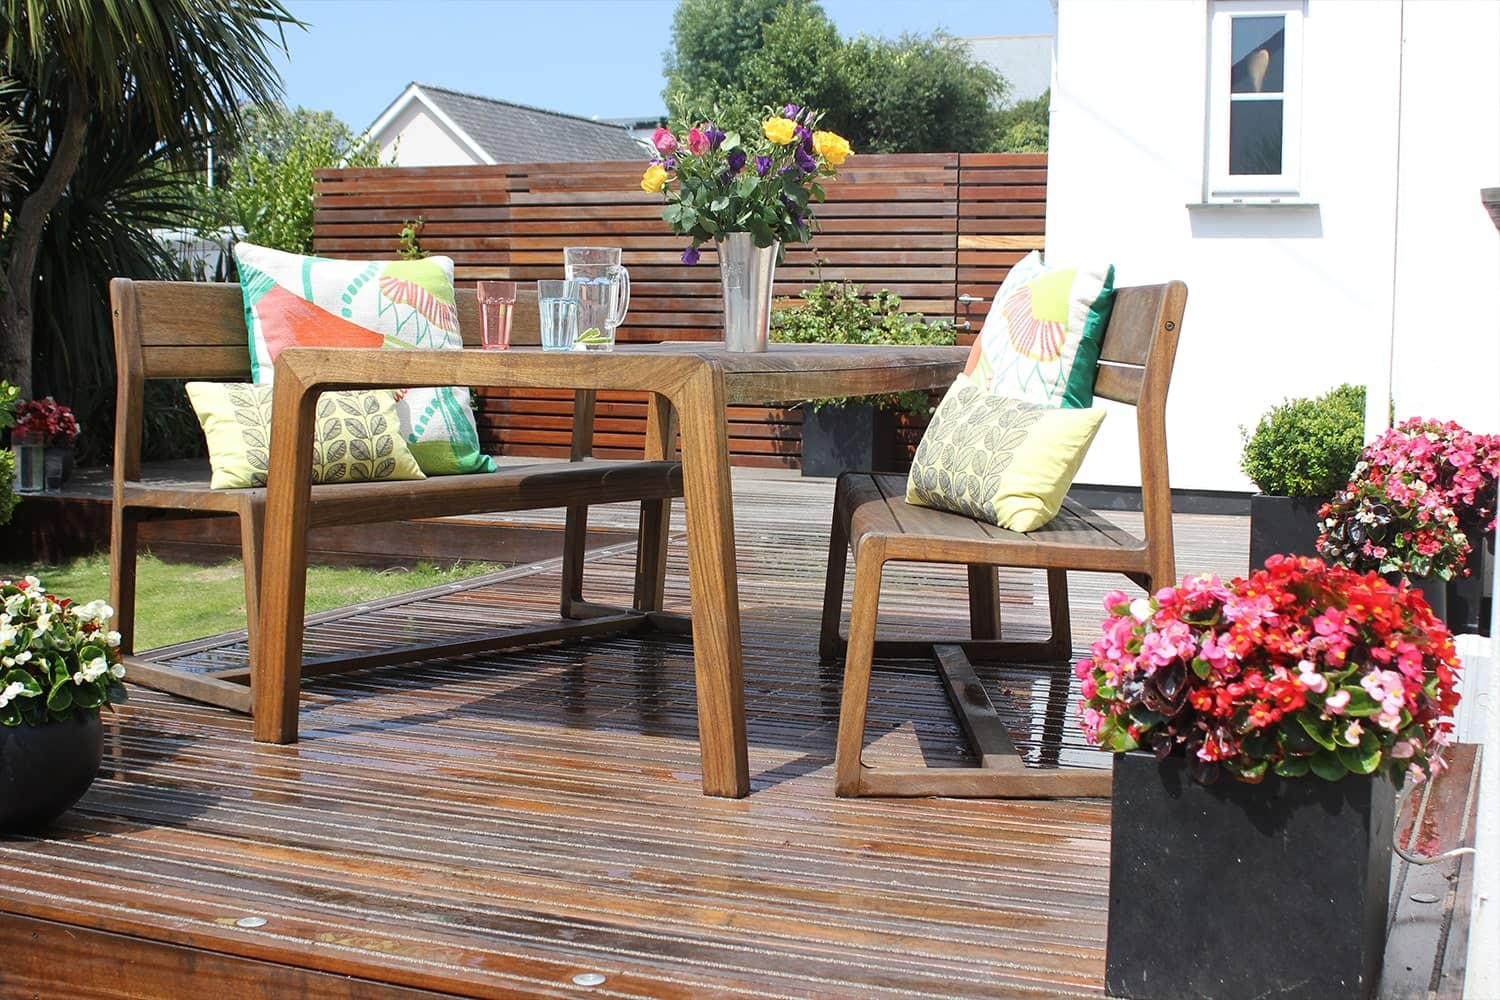 Timber garden furniture with colourful furnishings on non-slip hardwood deck in summer